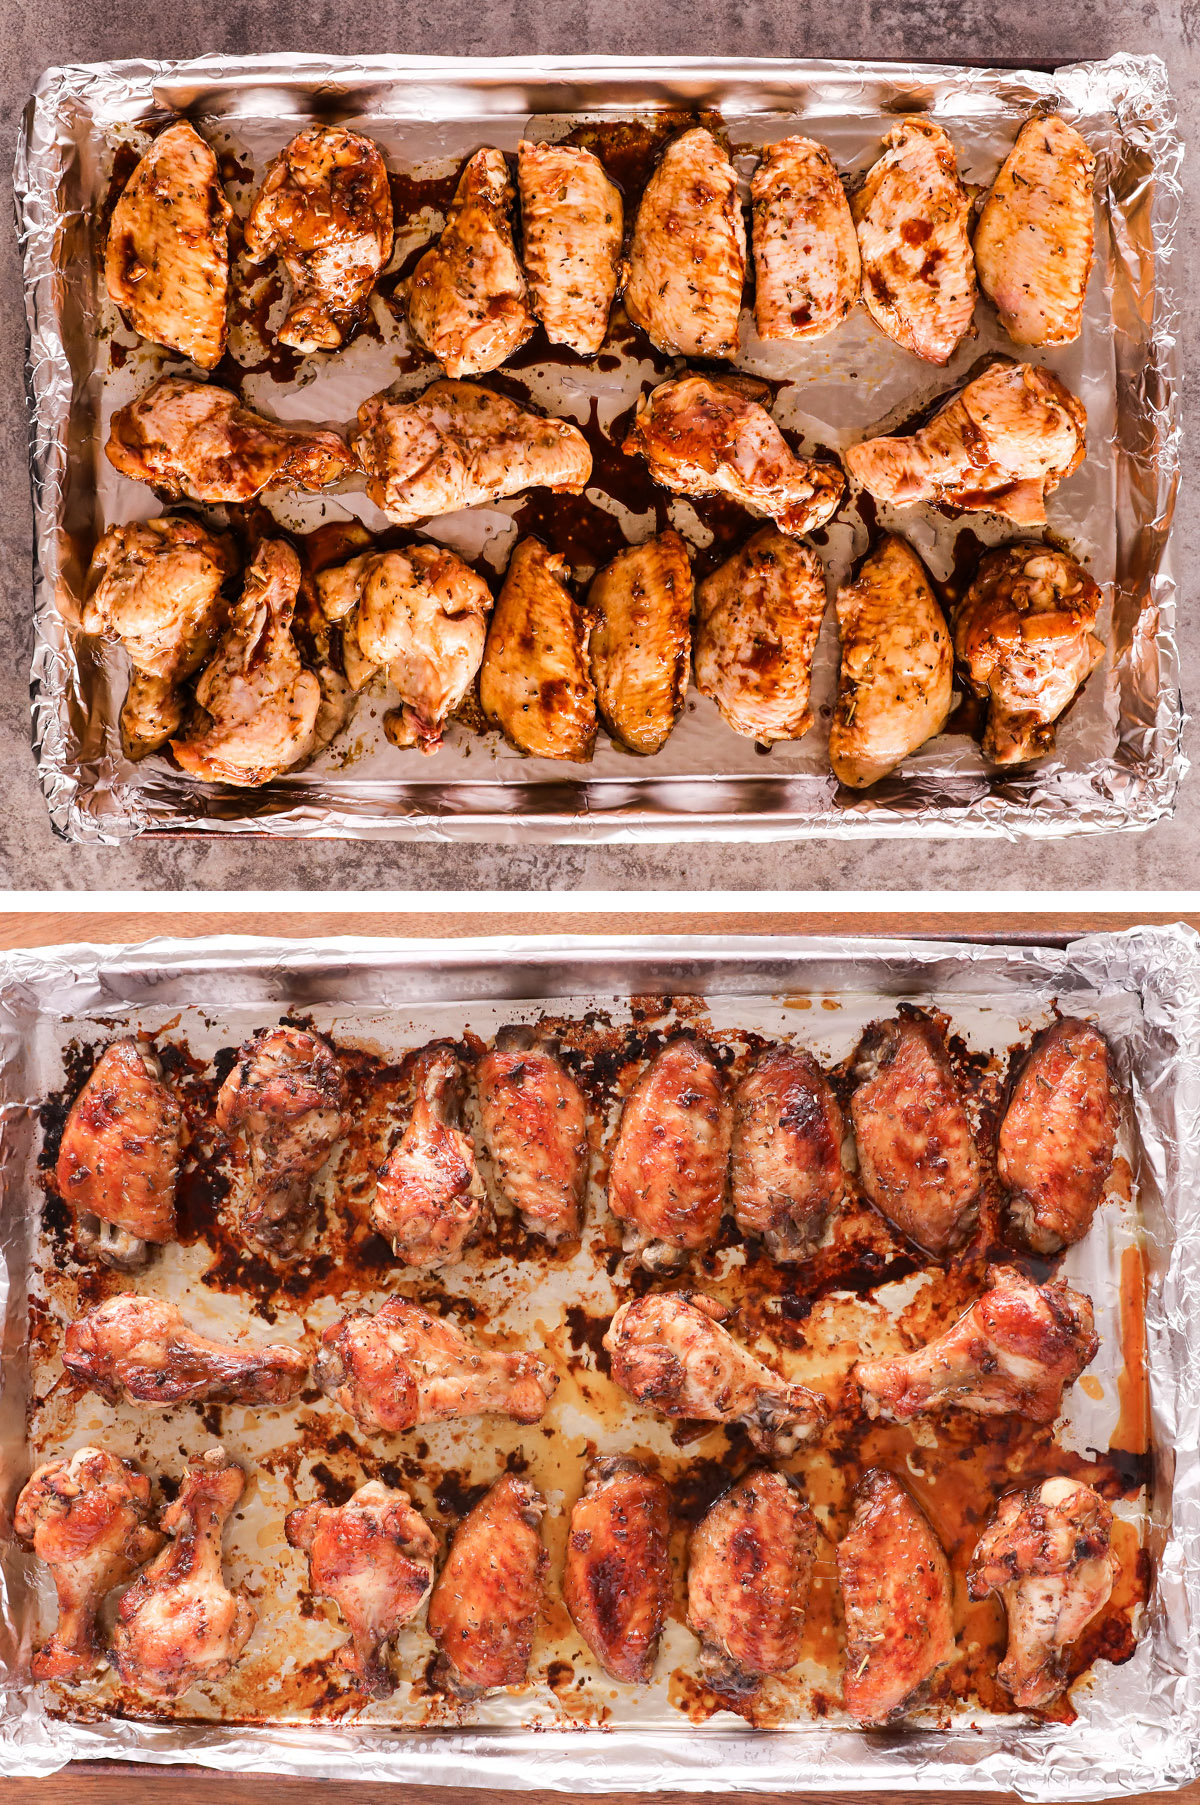 Two images combined. First is raw chicken wings, second is baked.